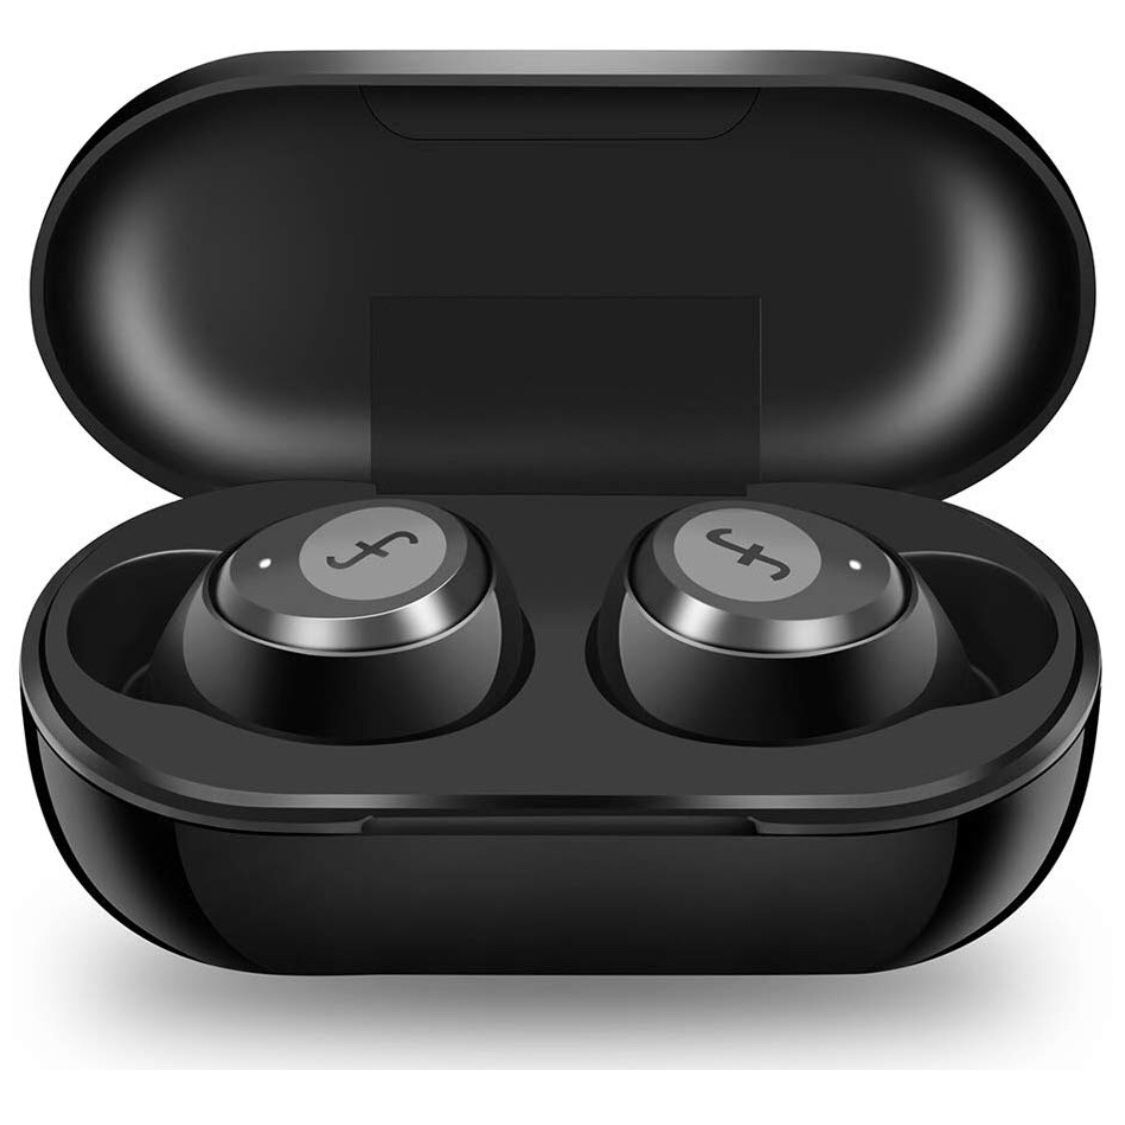 True Wireless Earbuds - Funcl Bluetooth Earbuds Wireless Headphones TWS in-Ear Earphones with 3D Stereo Hi-Fi Sound, Touch Control, Mic, Charging Case